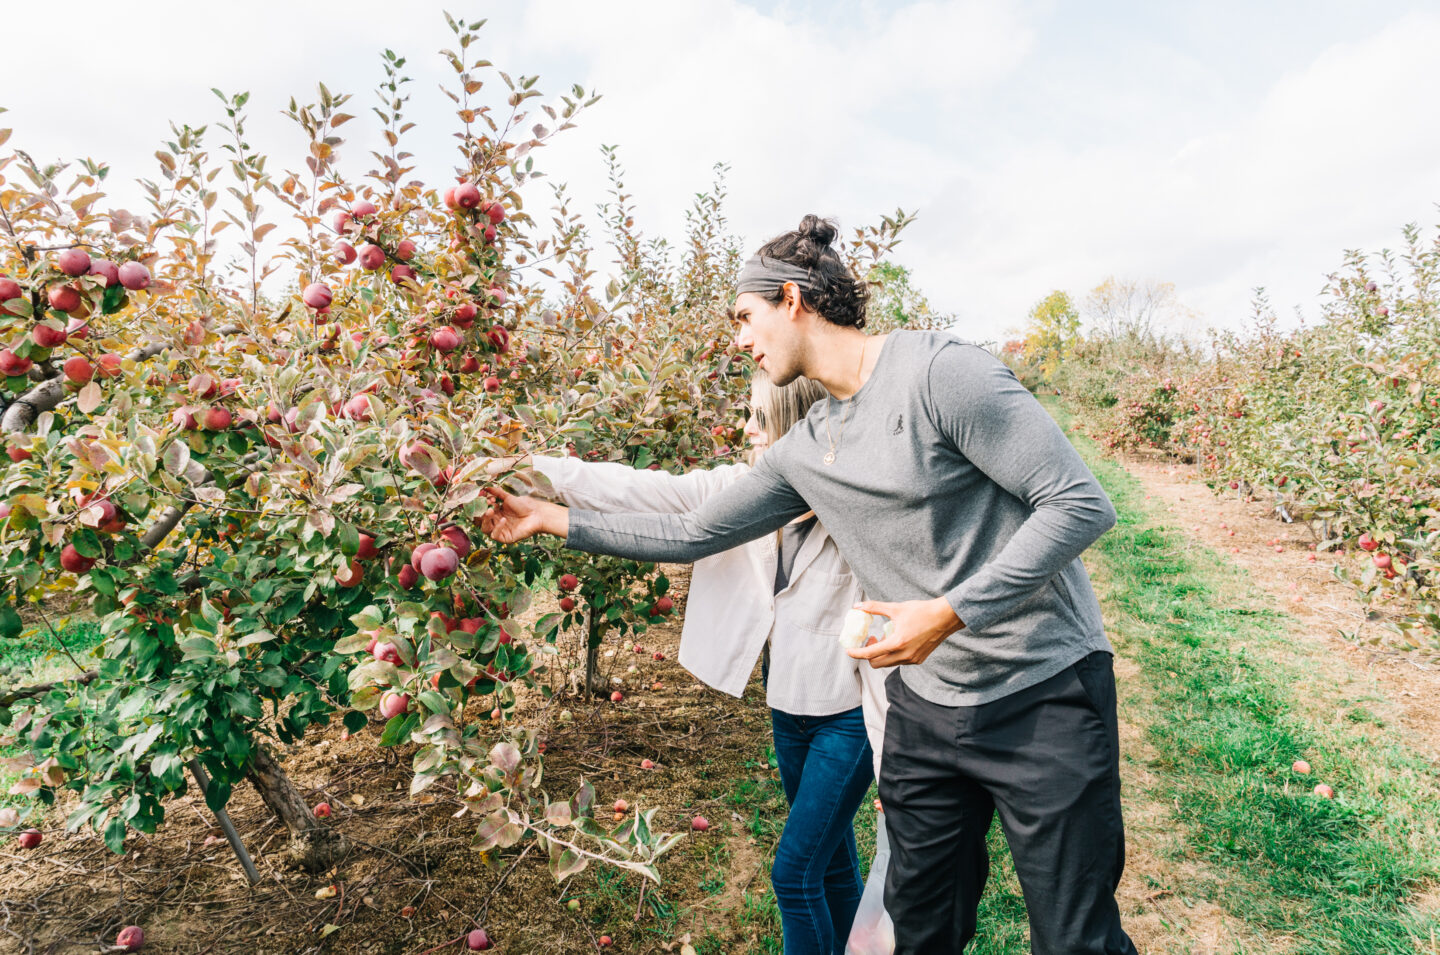 Pick Your Own Apples at Brantview Apples and Cider Farm